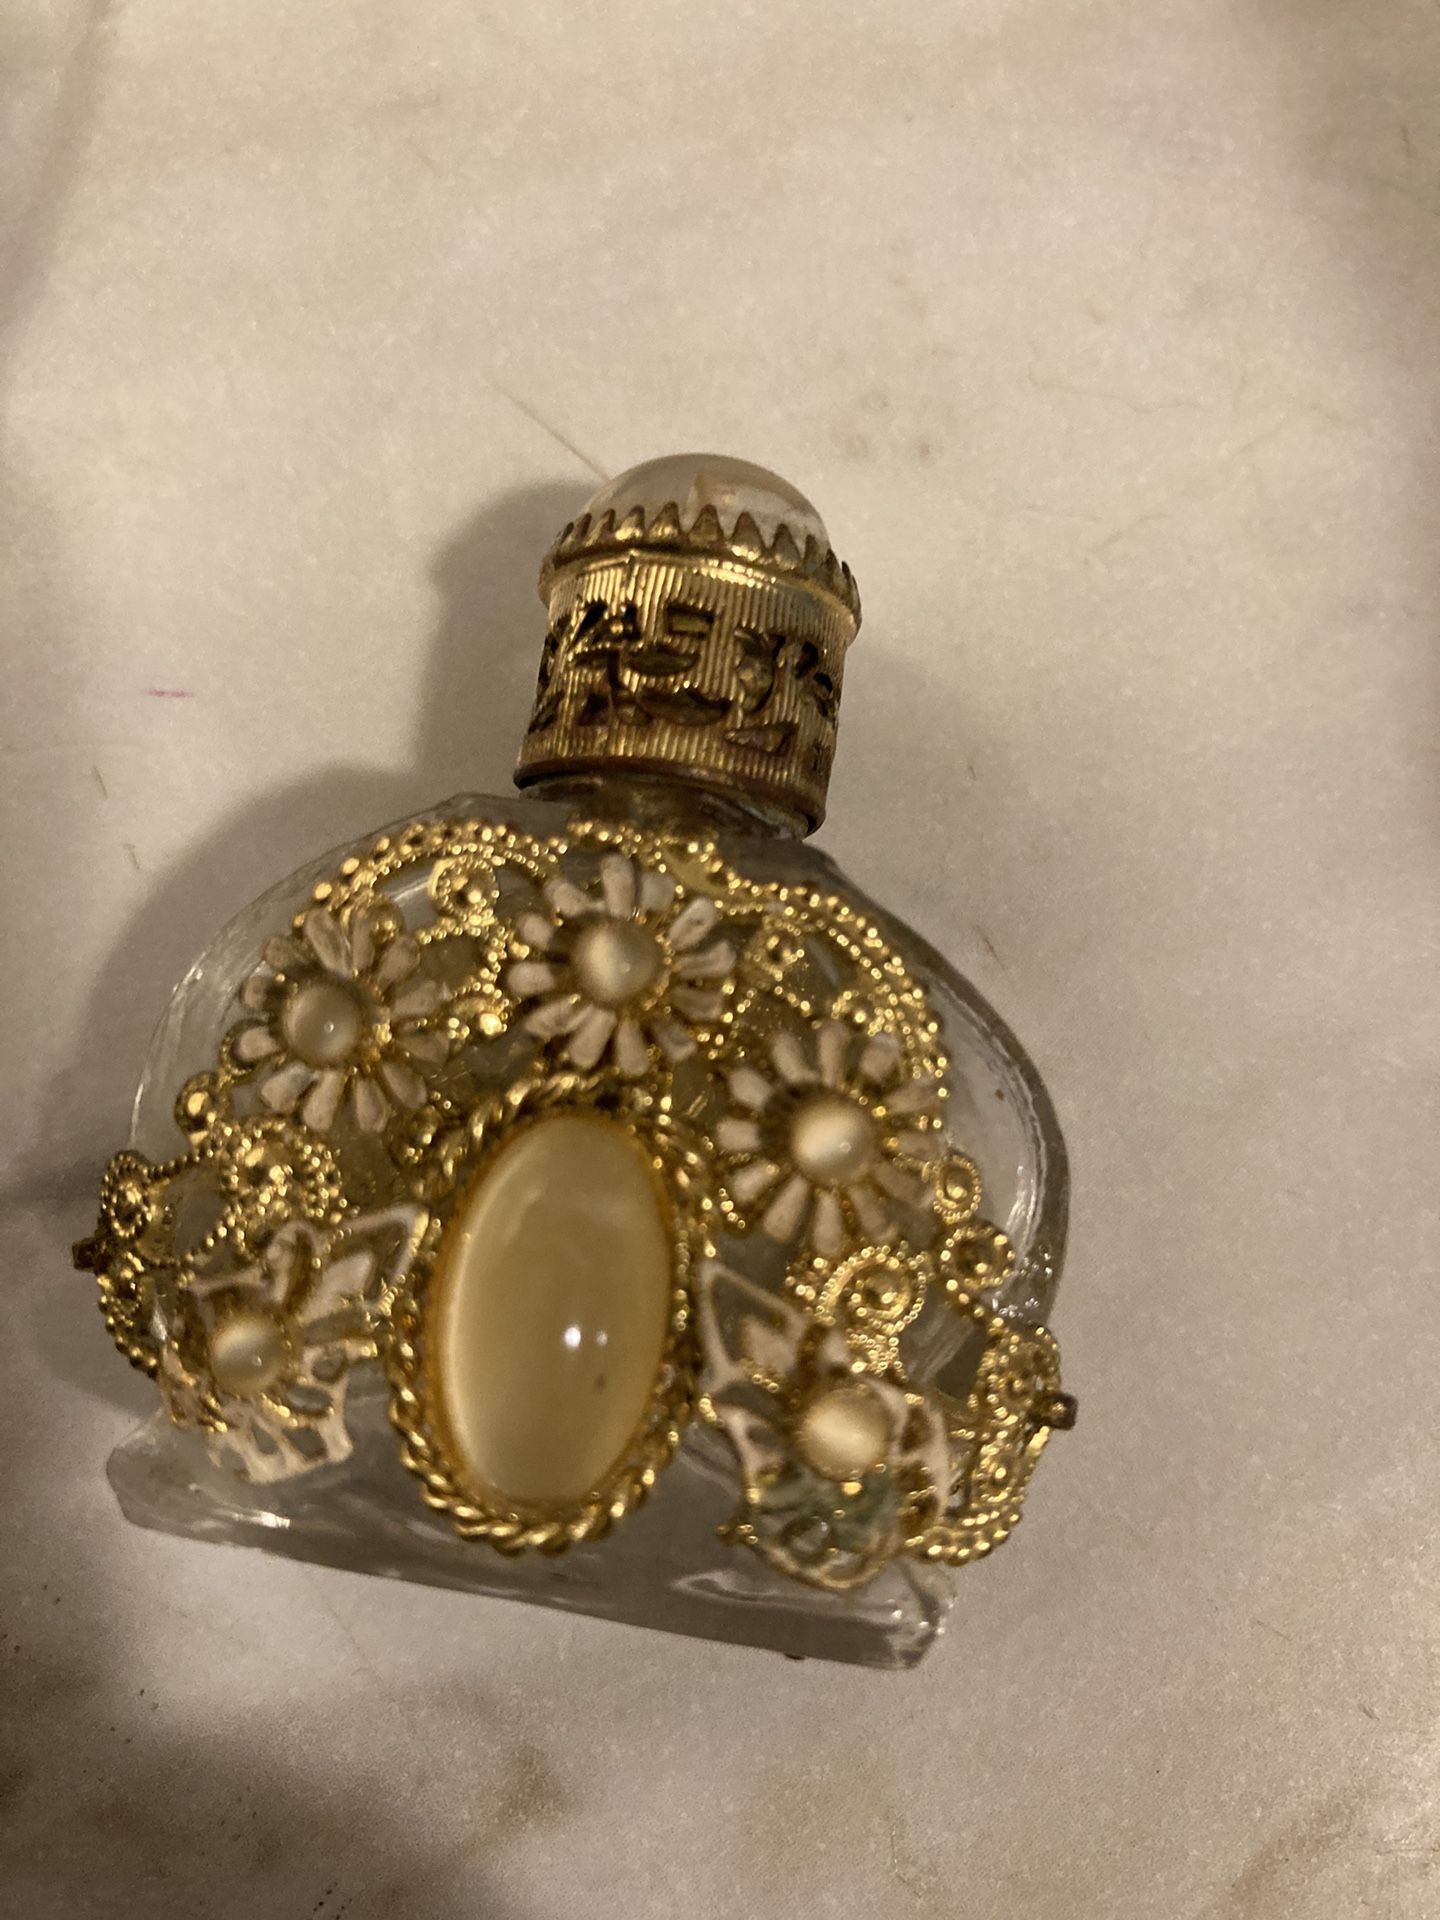 Antique perfume bottle very small